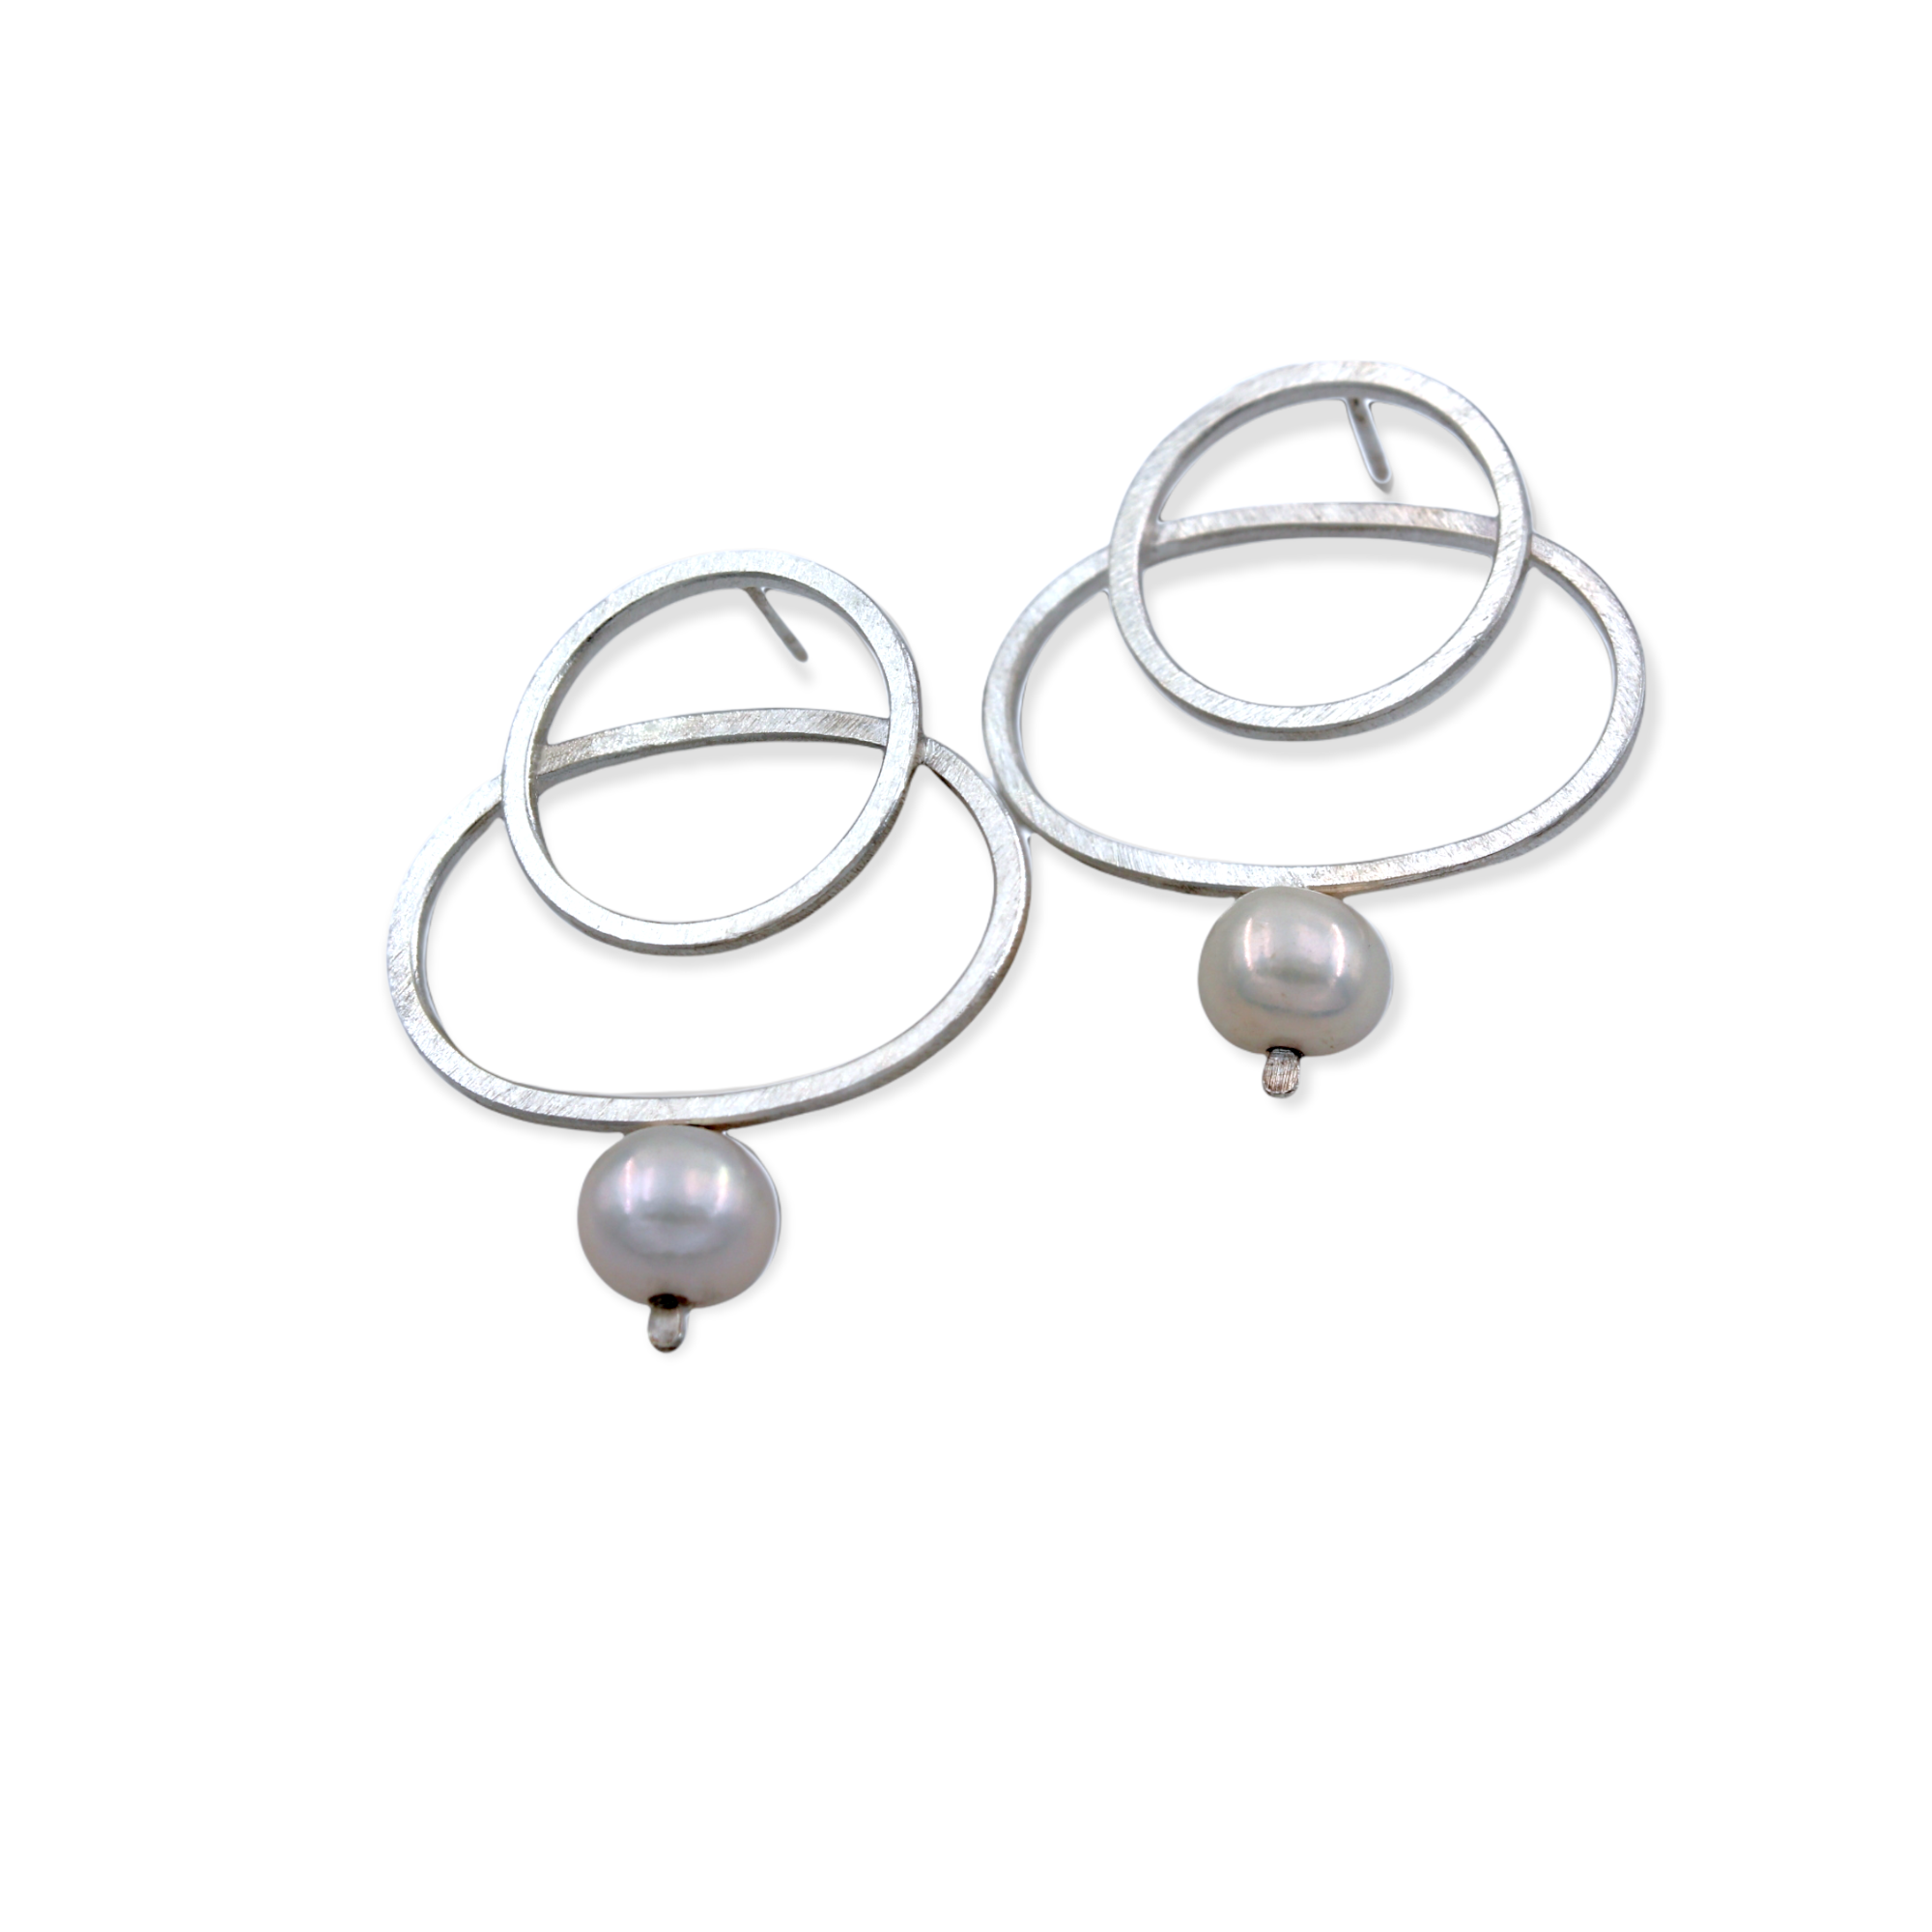 All right earrings with pearls